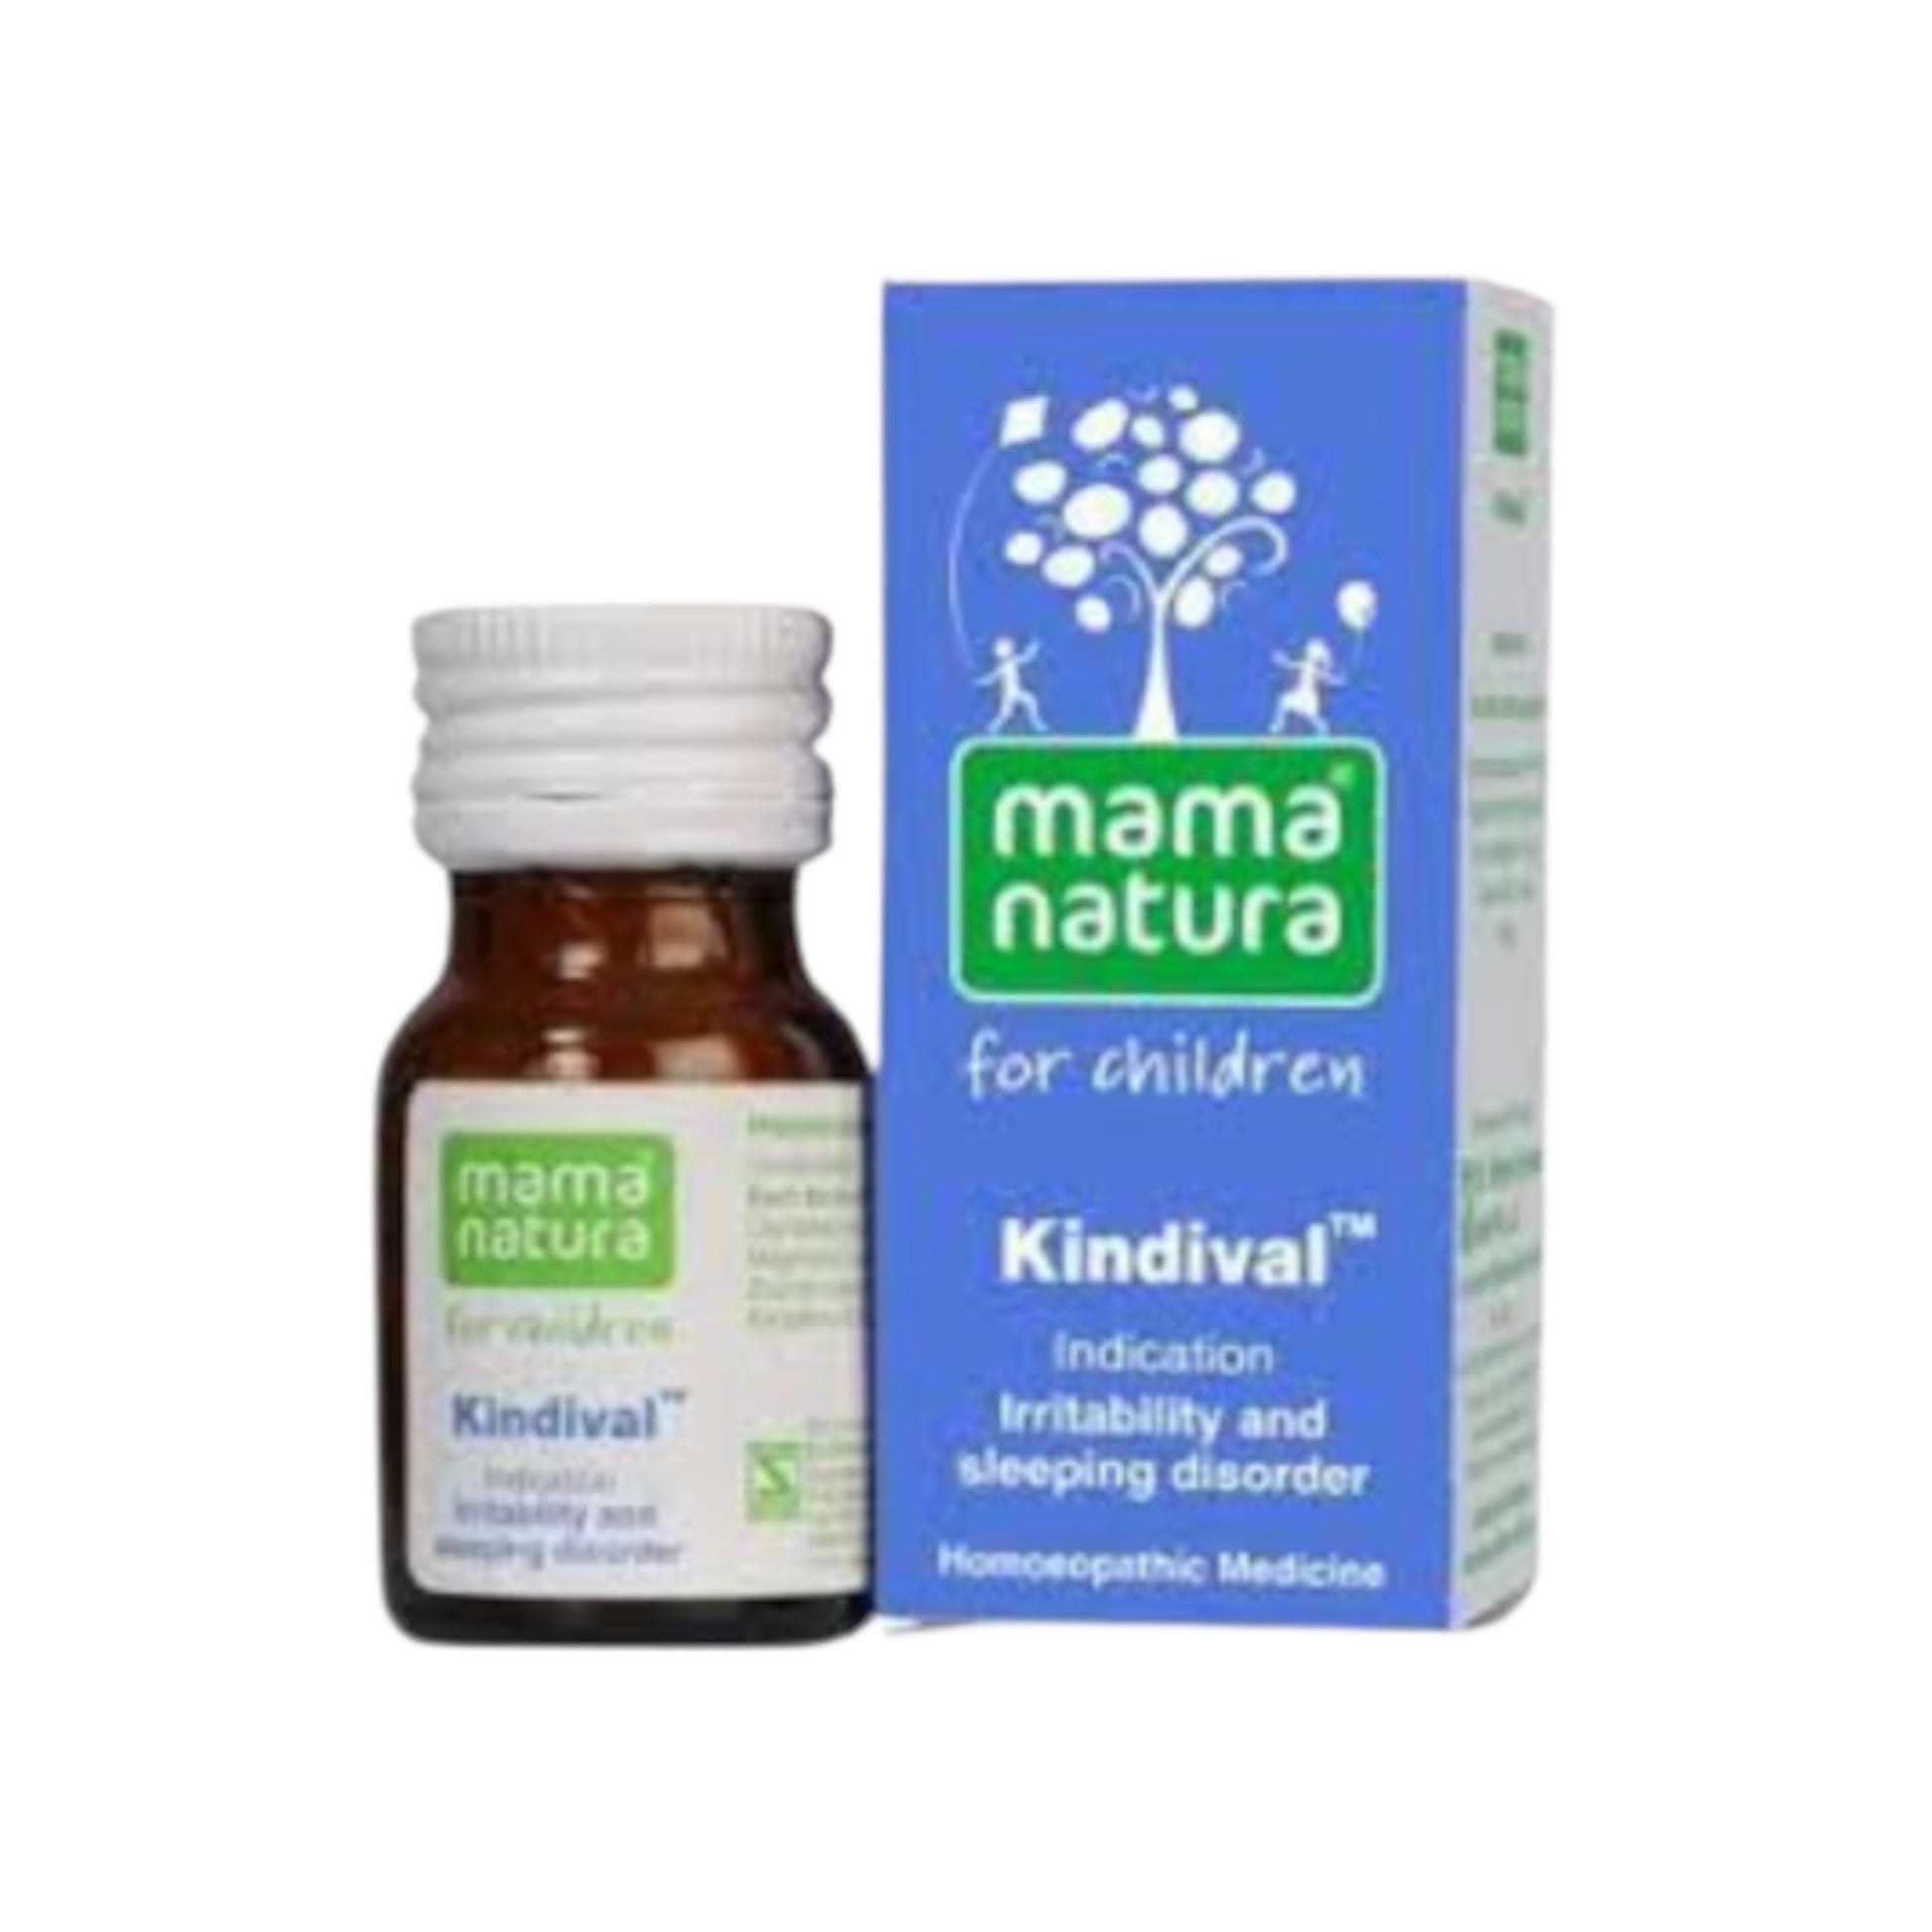 Dr. Schwabe Homeopathy Kindival Globules 10 g - Relieving indigestion, bloating, flatulence, and stomach discomfort.